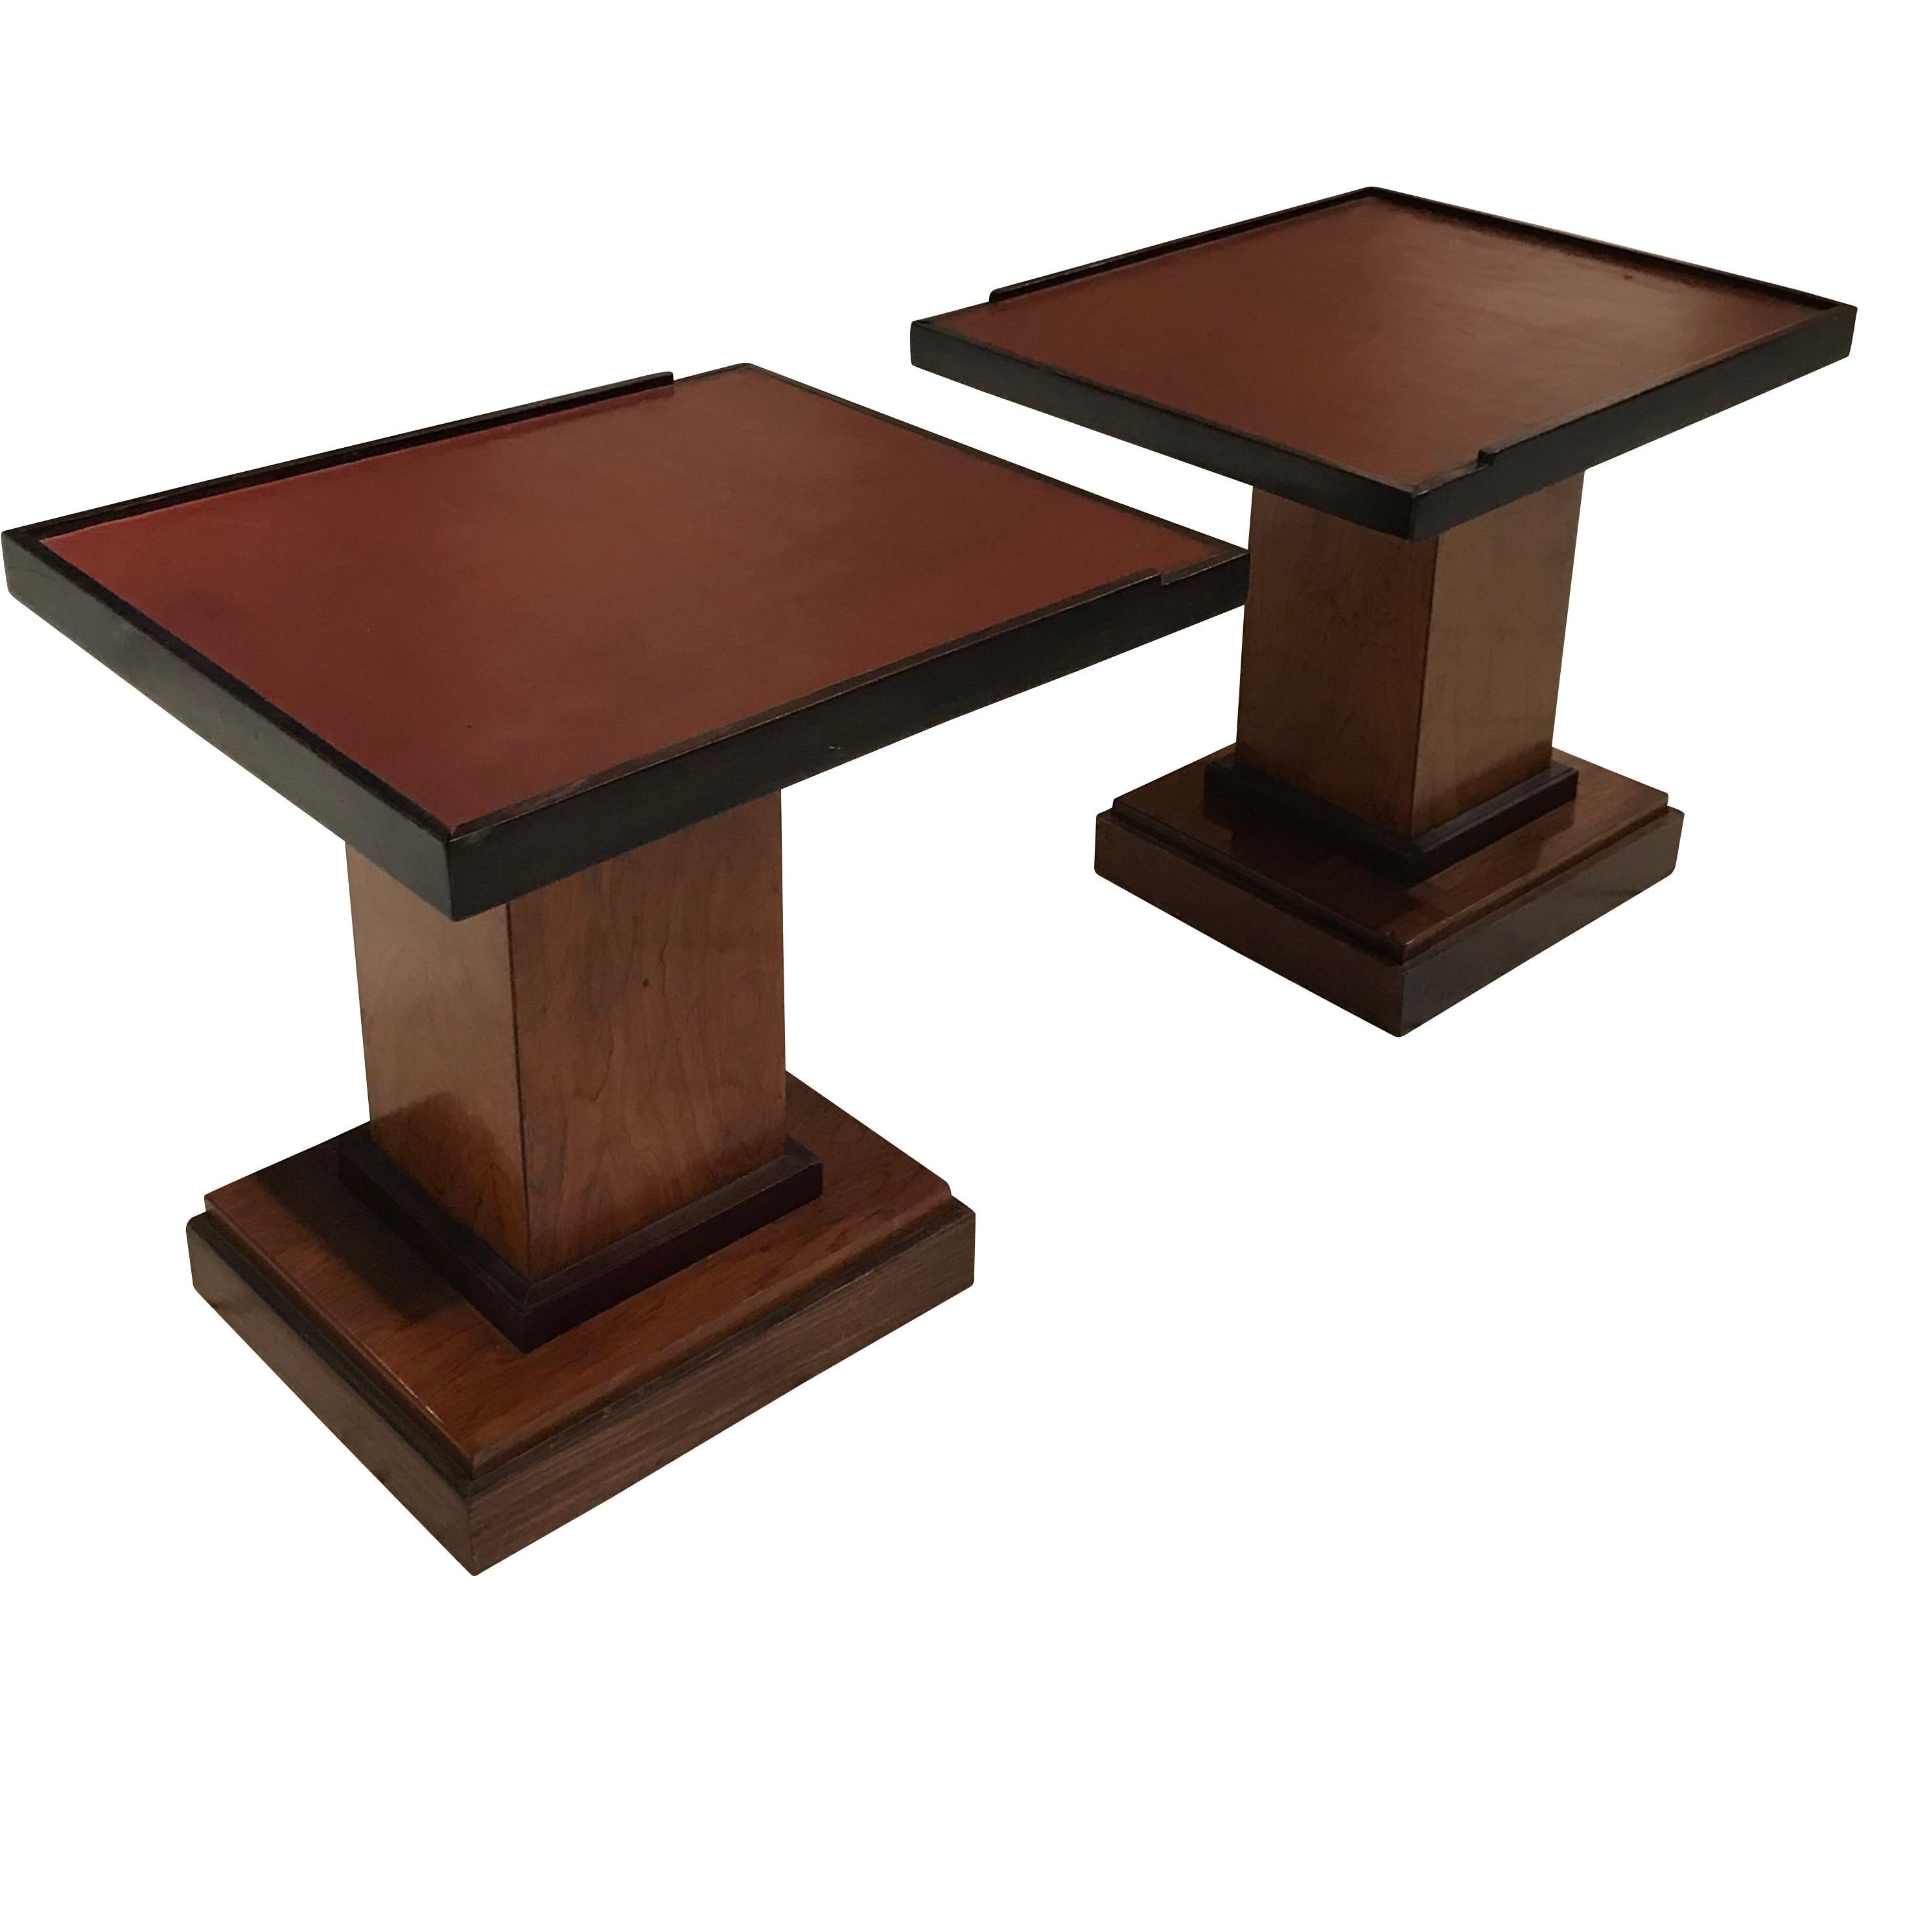 1970s French pair of rosewood coffee tables with cordovan colored leather tops
Accented brown trim.